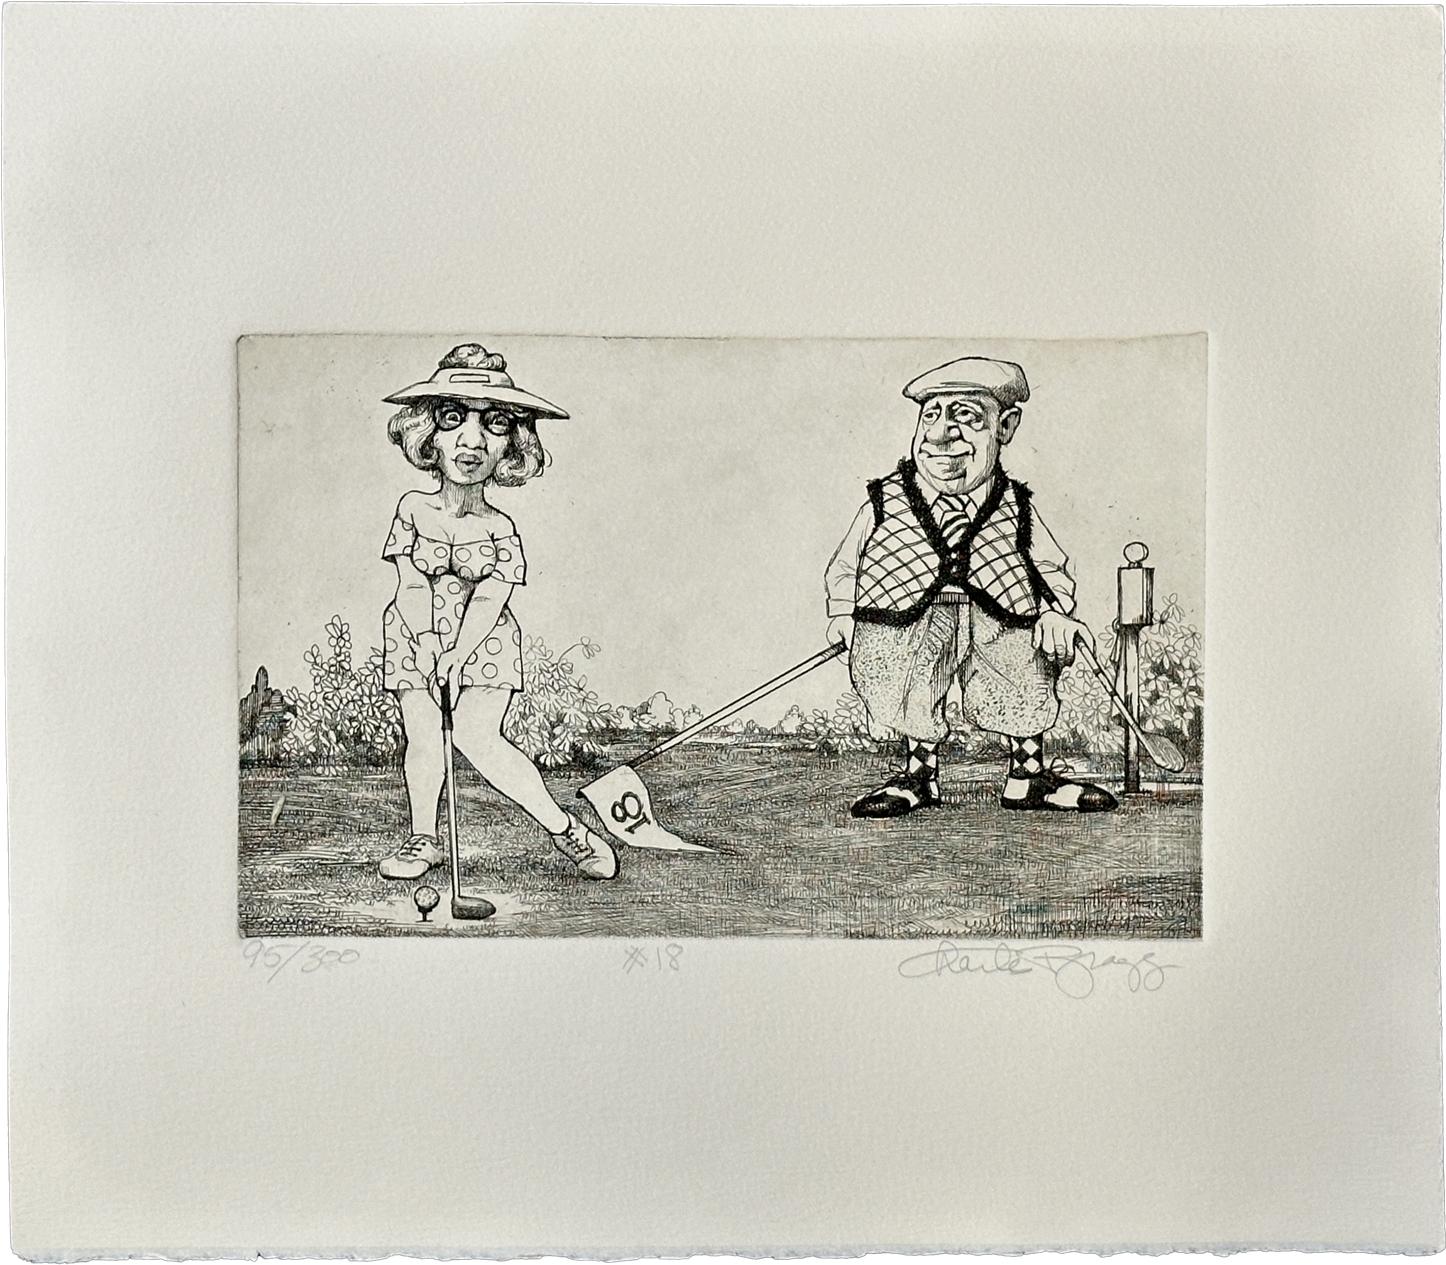 Charles Bragg Figurative Print - Women in Golf #18 Signed Limited Edition Etching 1988 